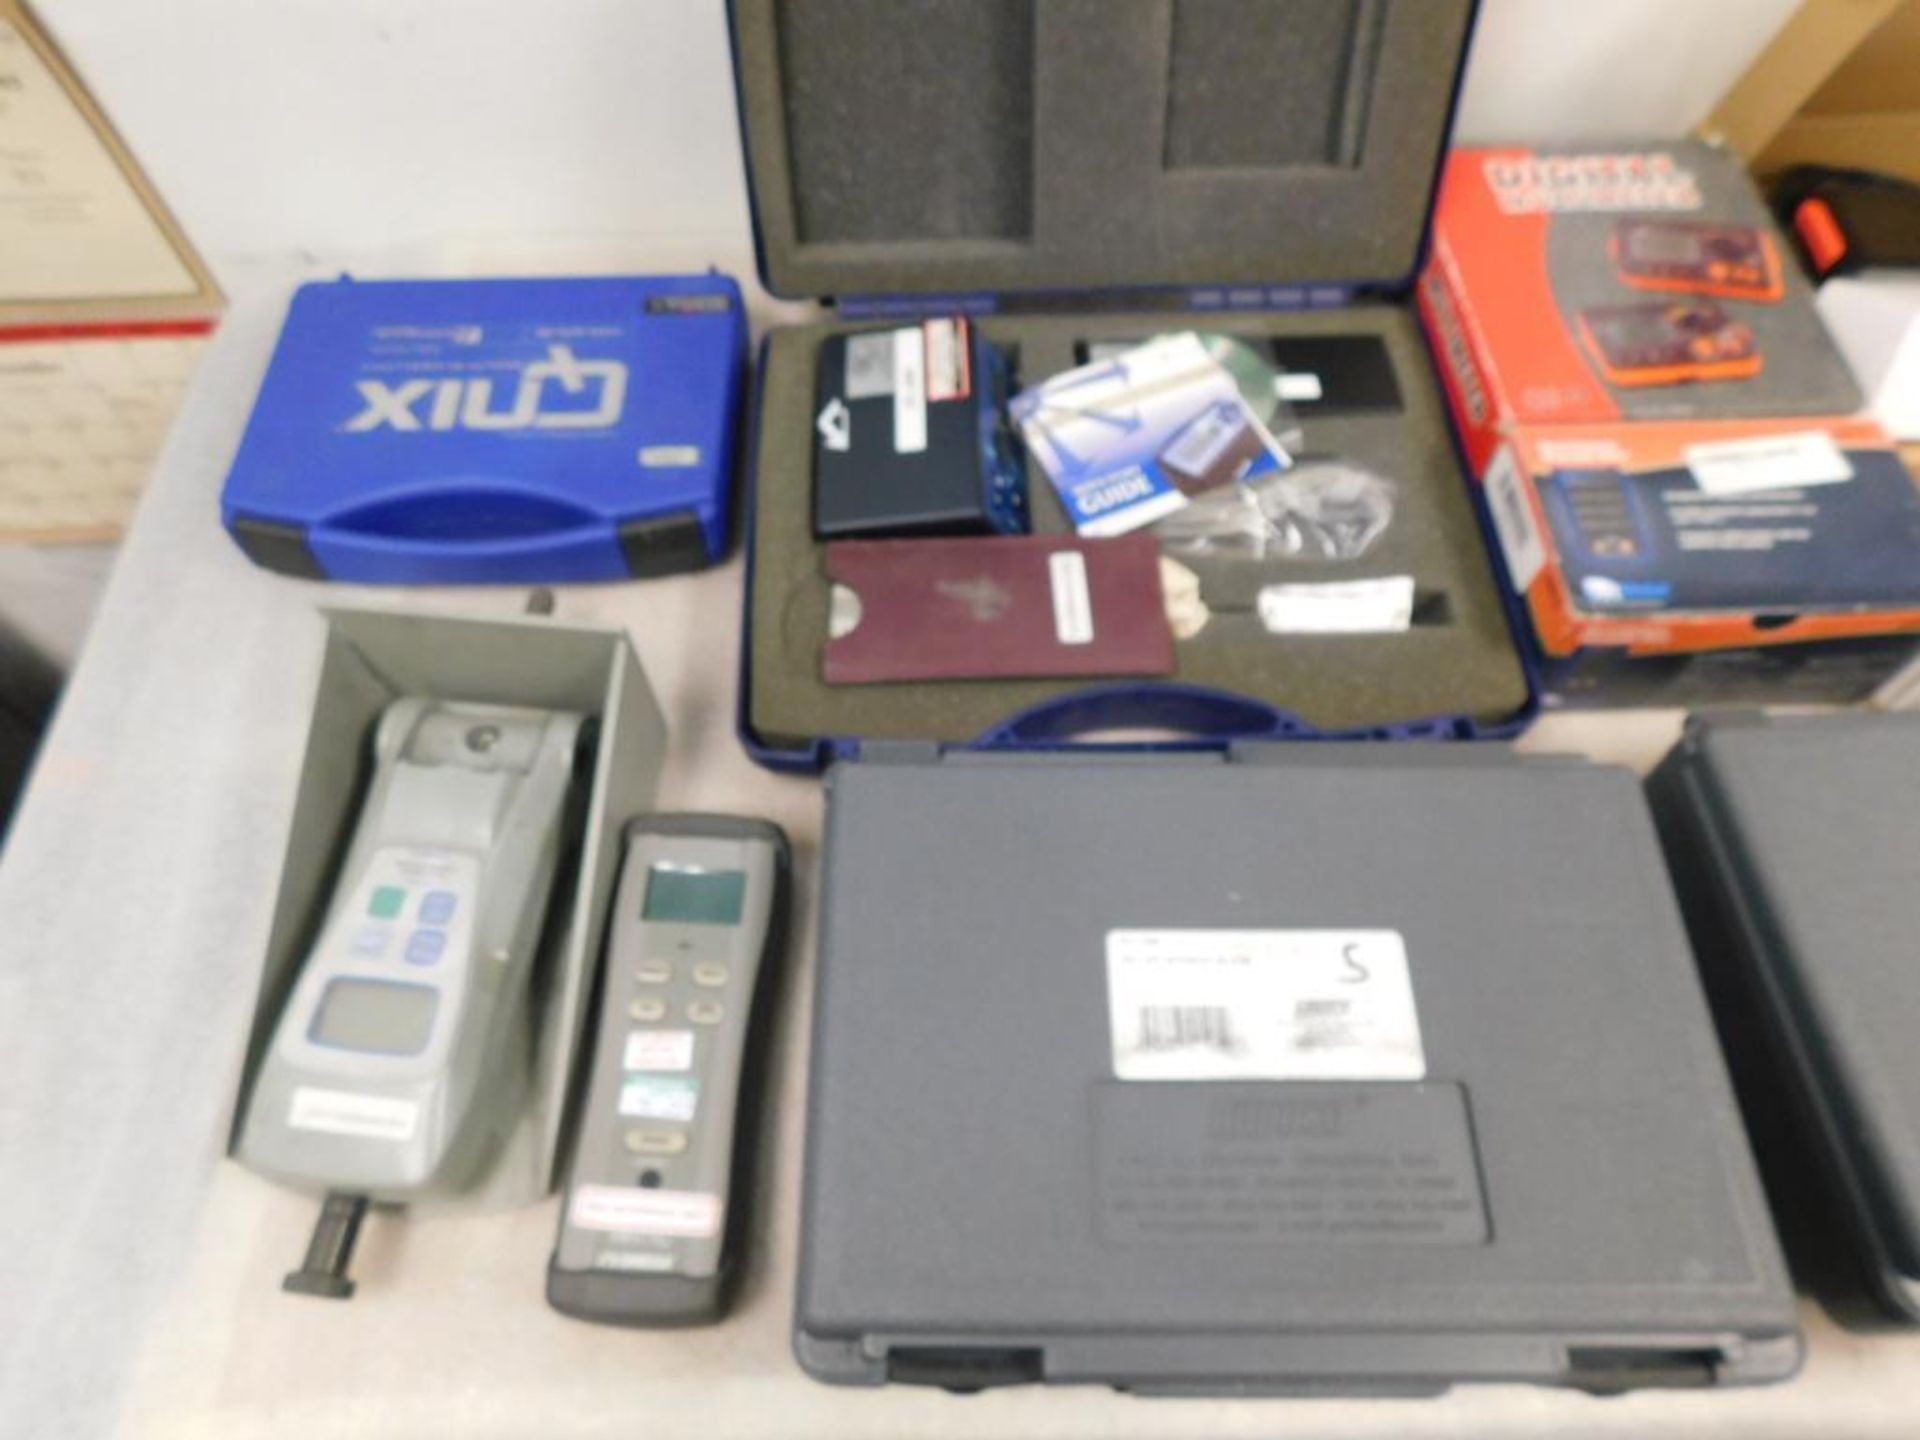 LOT: Digital Test Equipment Omega HHIIC Shimpo FGV 1000 HX Force Gage Glossmeter, Mult. Meters, etc. - Image 2 of 5